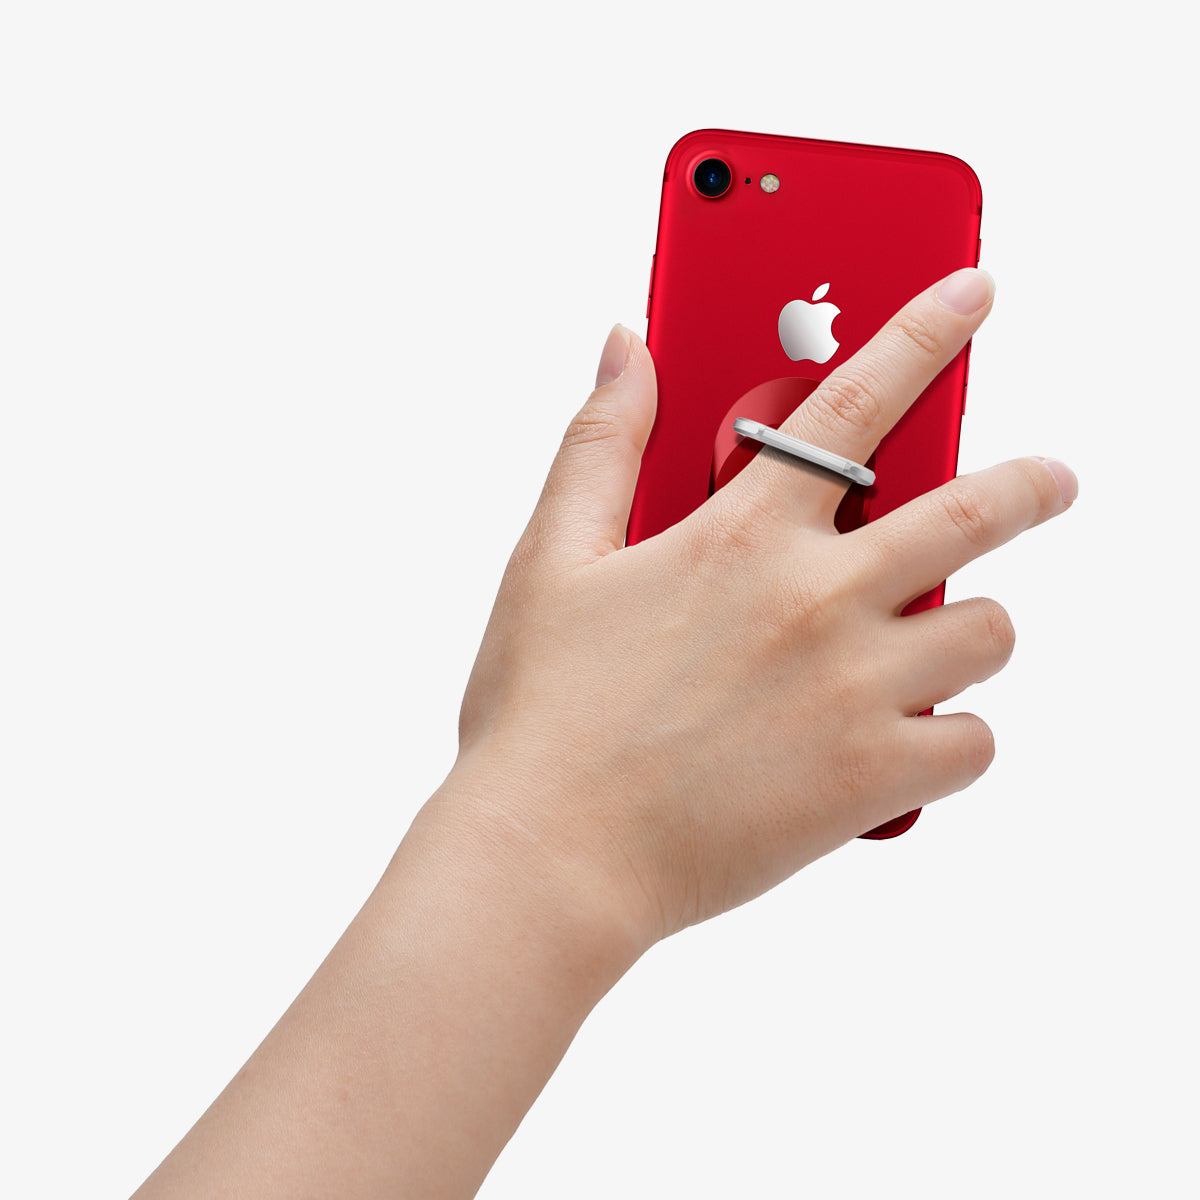 000SR21950 - Style Ring in red showing the phone in someone's hand and ring attached to back of device